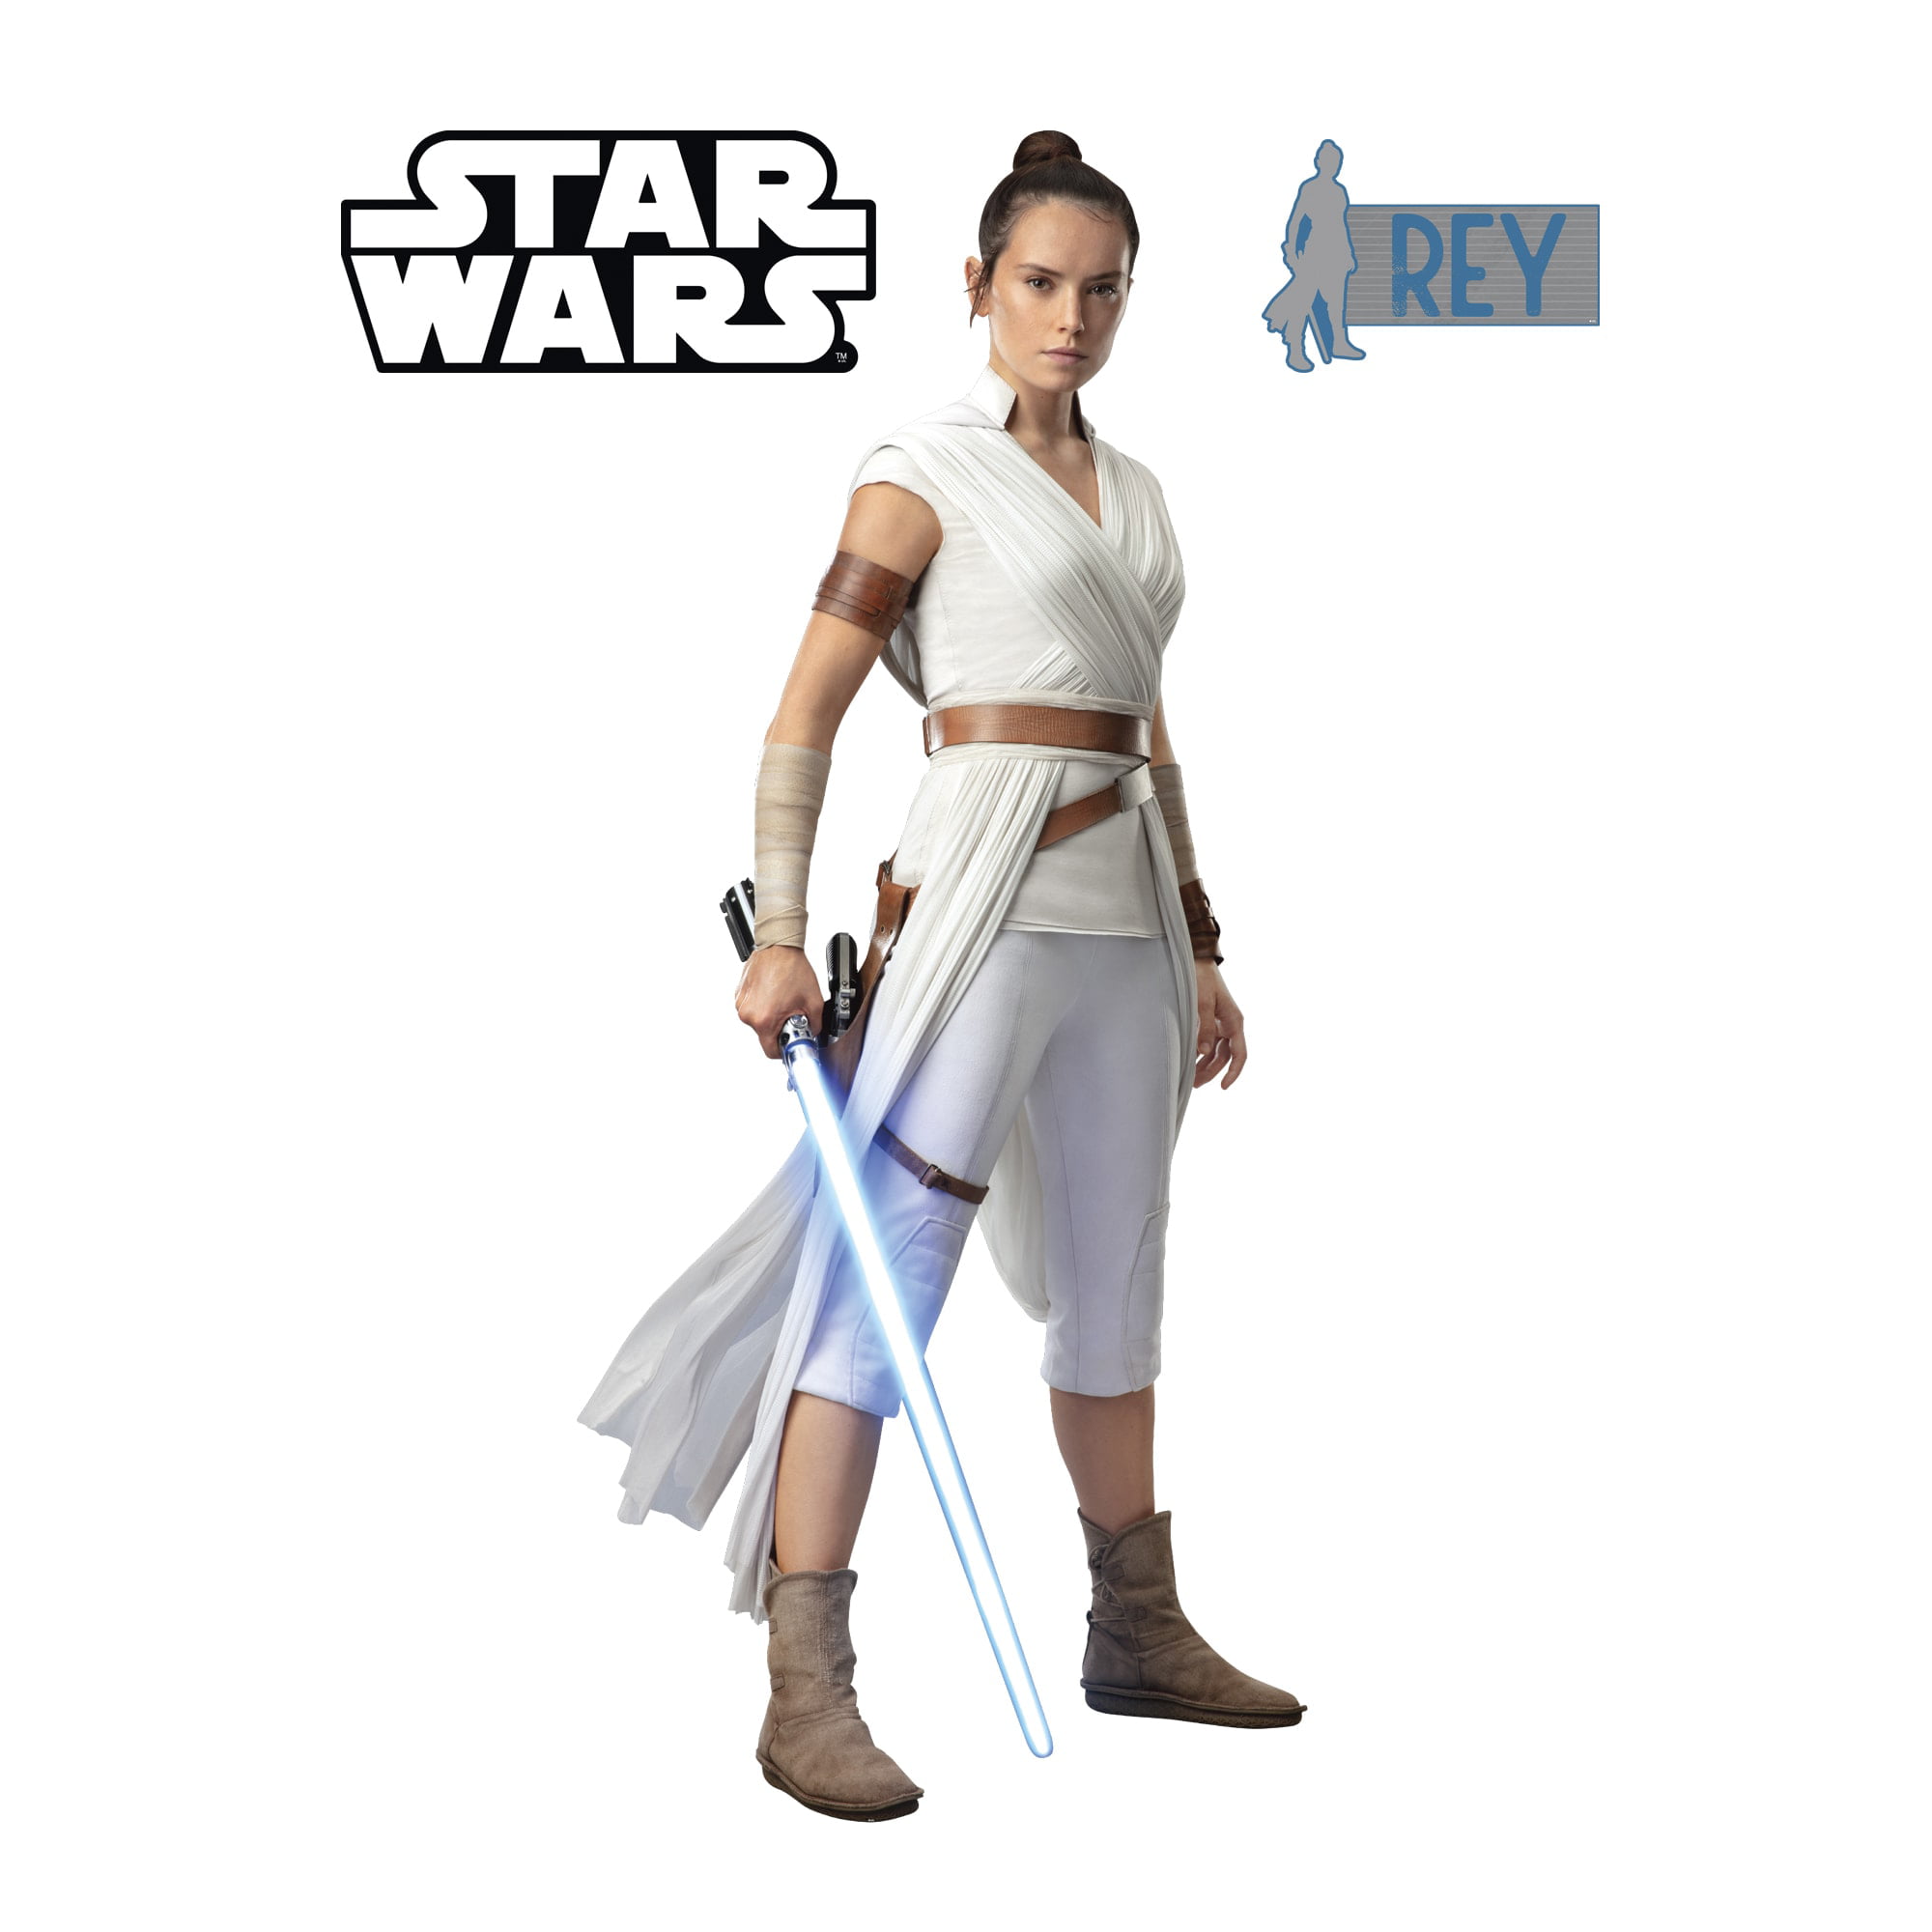 Large Officially Licensed Removable Wall Decal The Rise of Skywalker Rey Star Wars